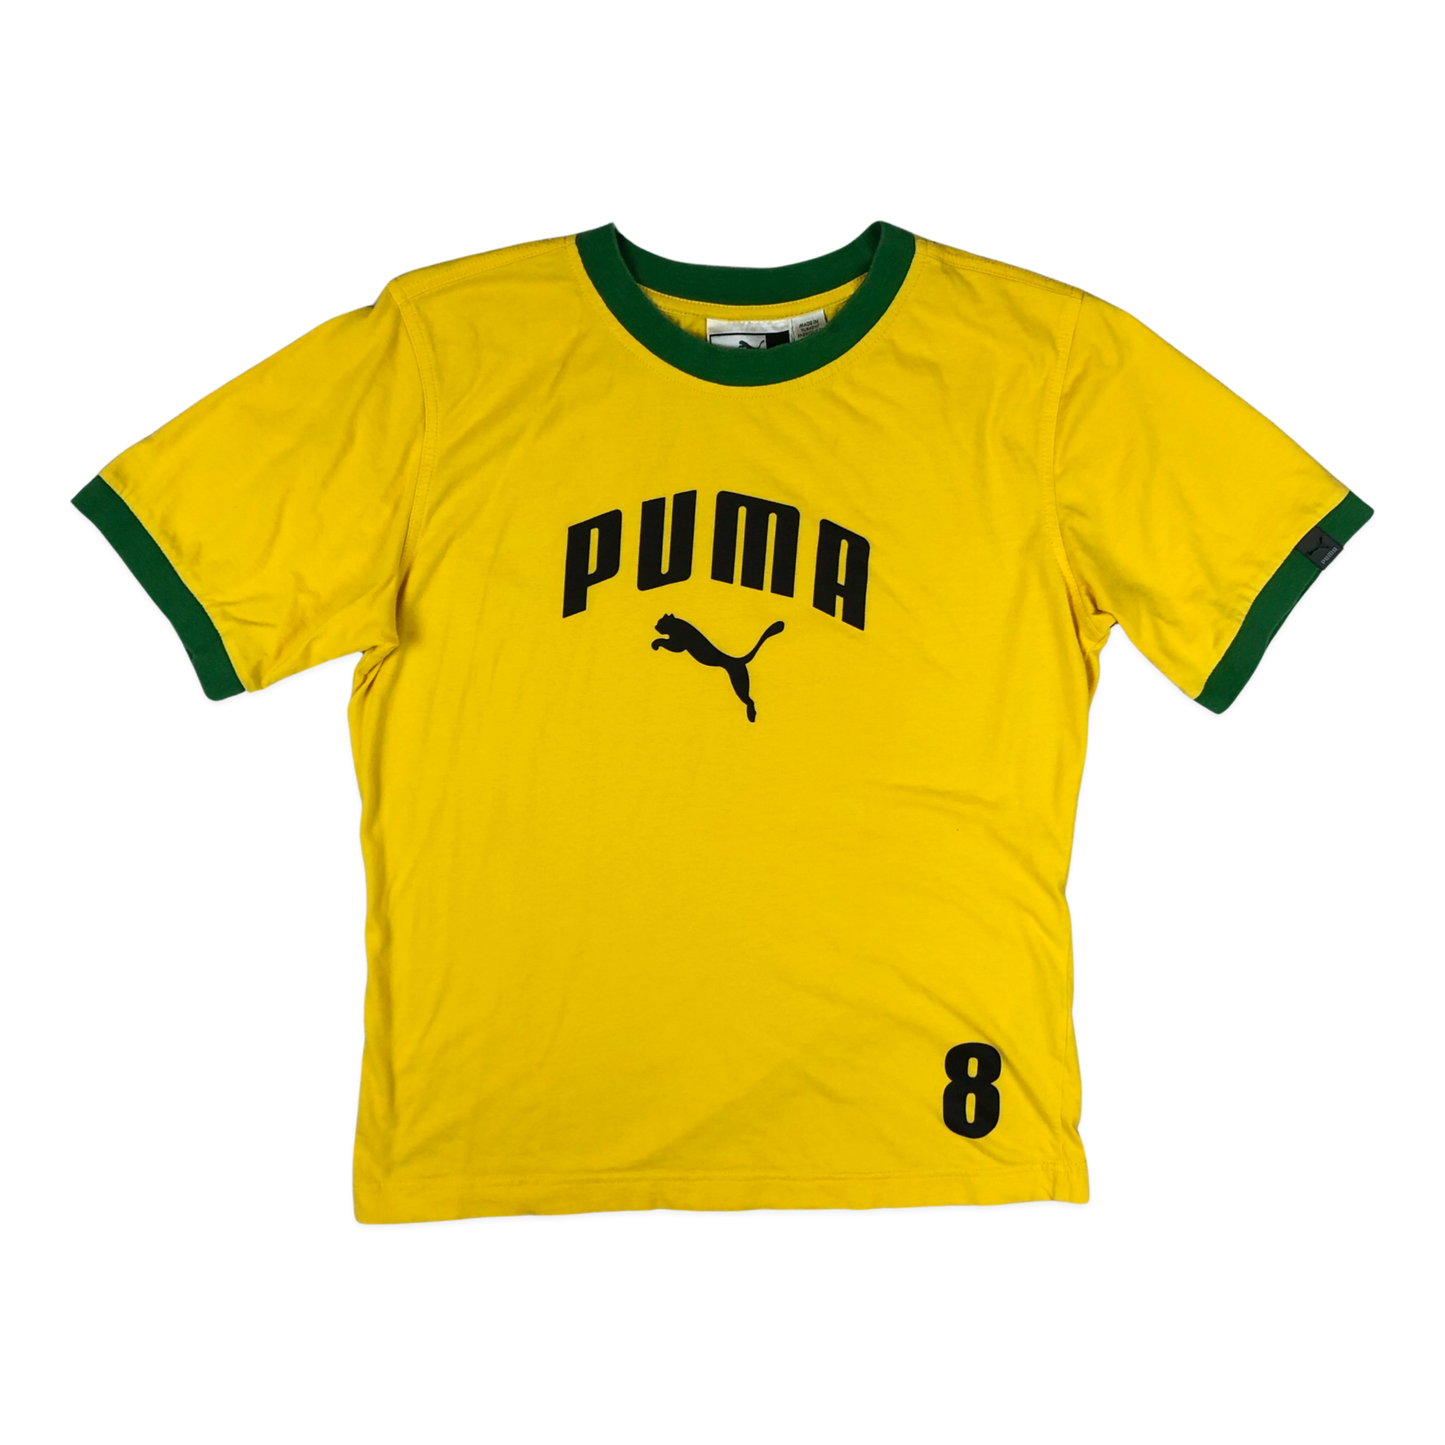 Vintage Puma Yellow and Green Ringer Tee S